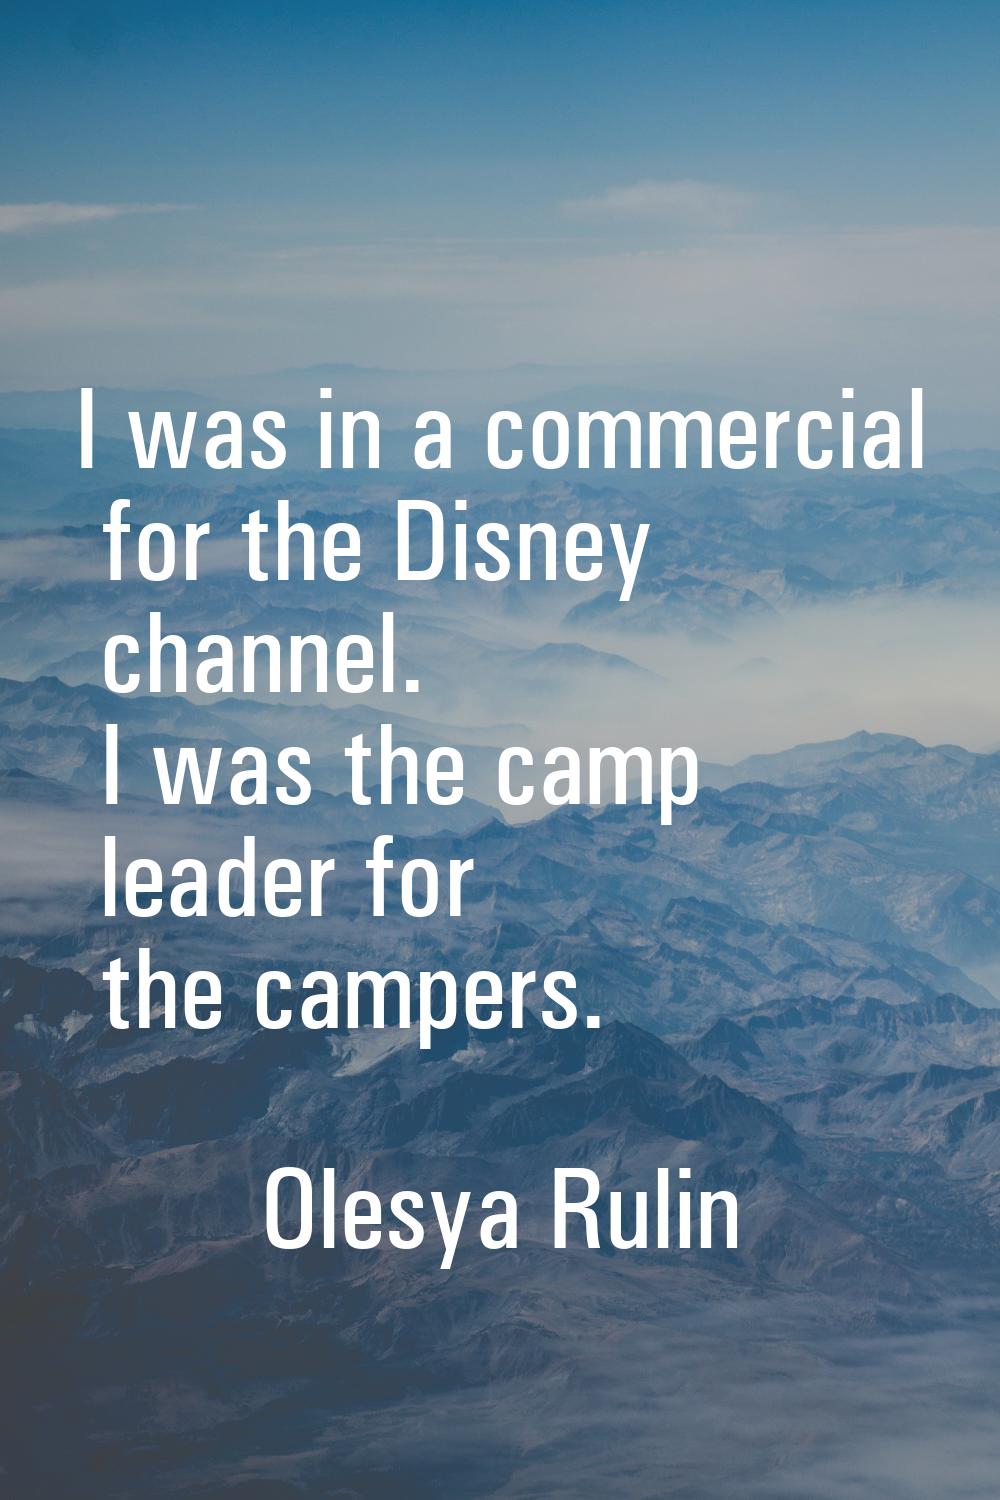 I was in a commercial for the Disney channel. I was the camp leader for the campers.